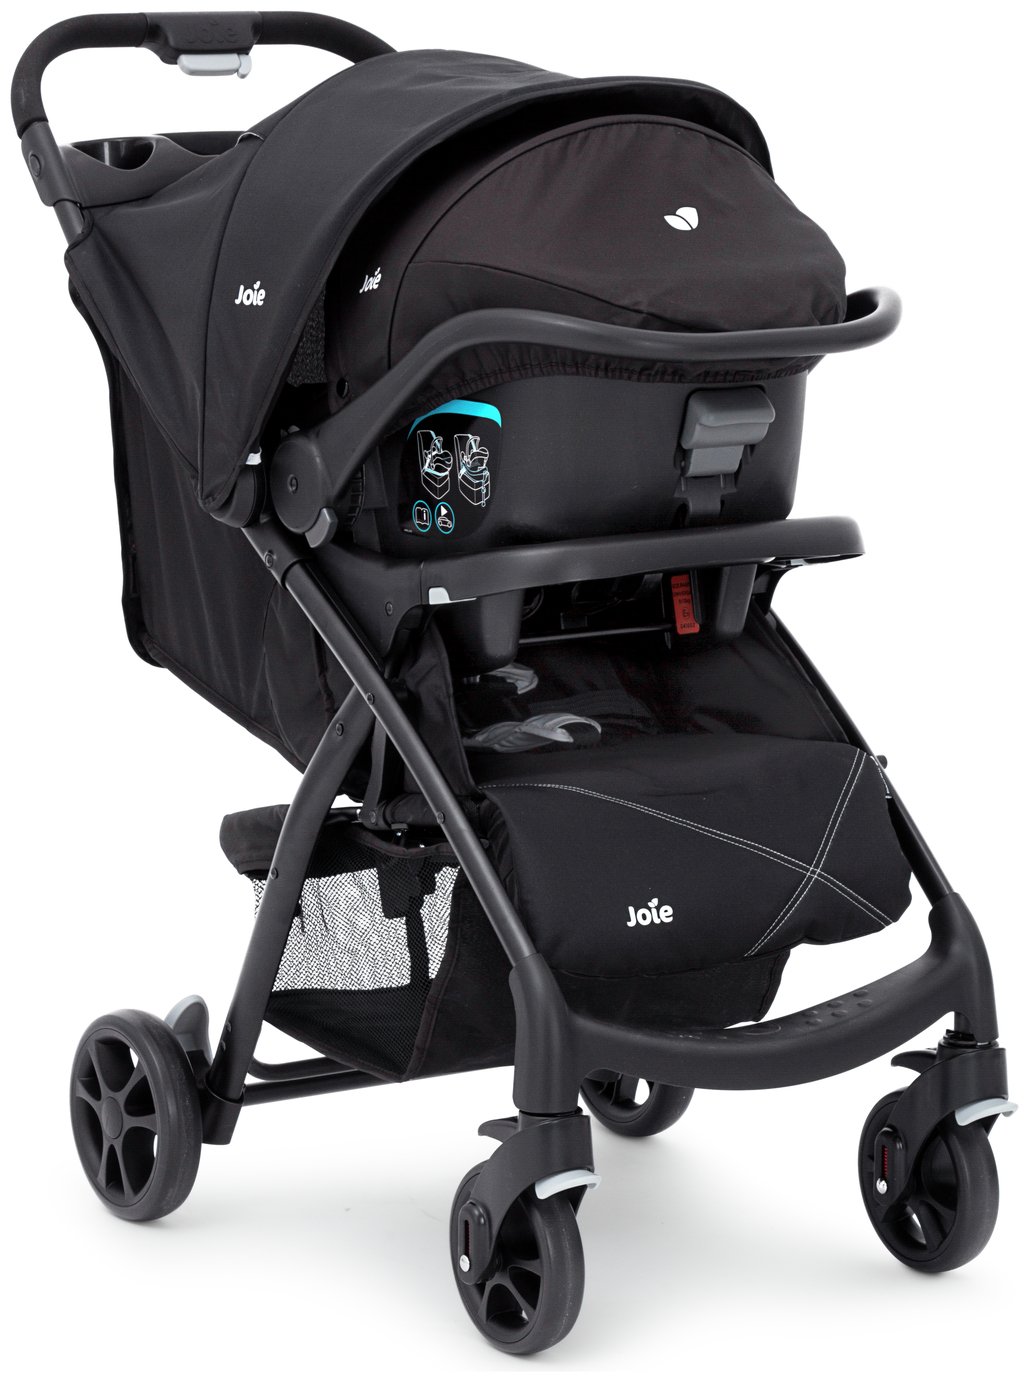 Joie Muze Universal Black Travel System. Review